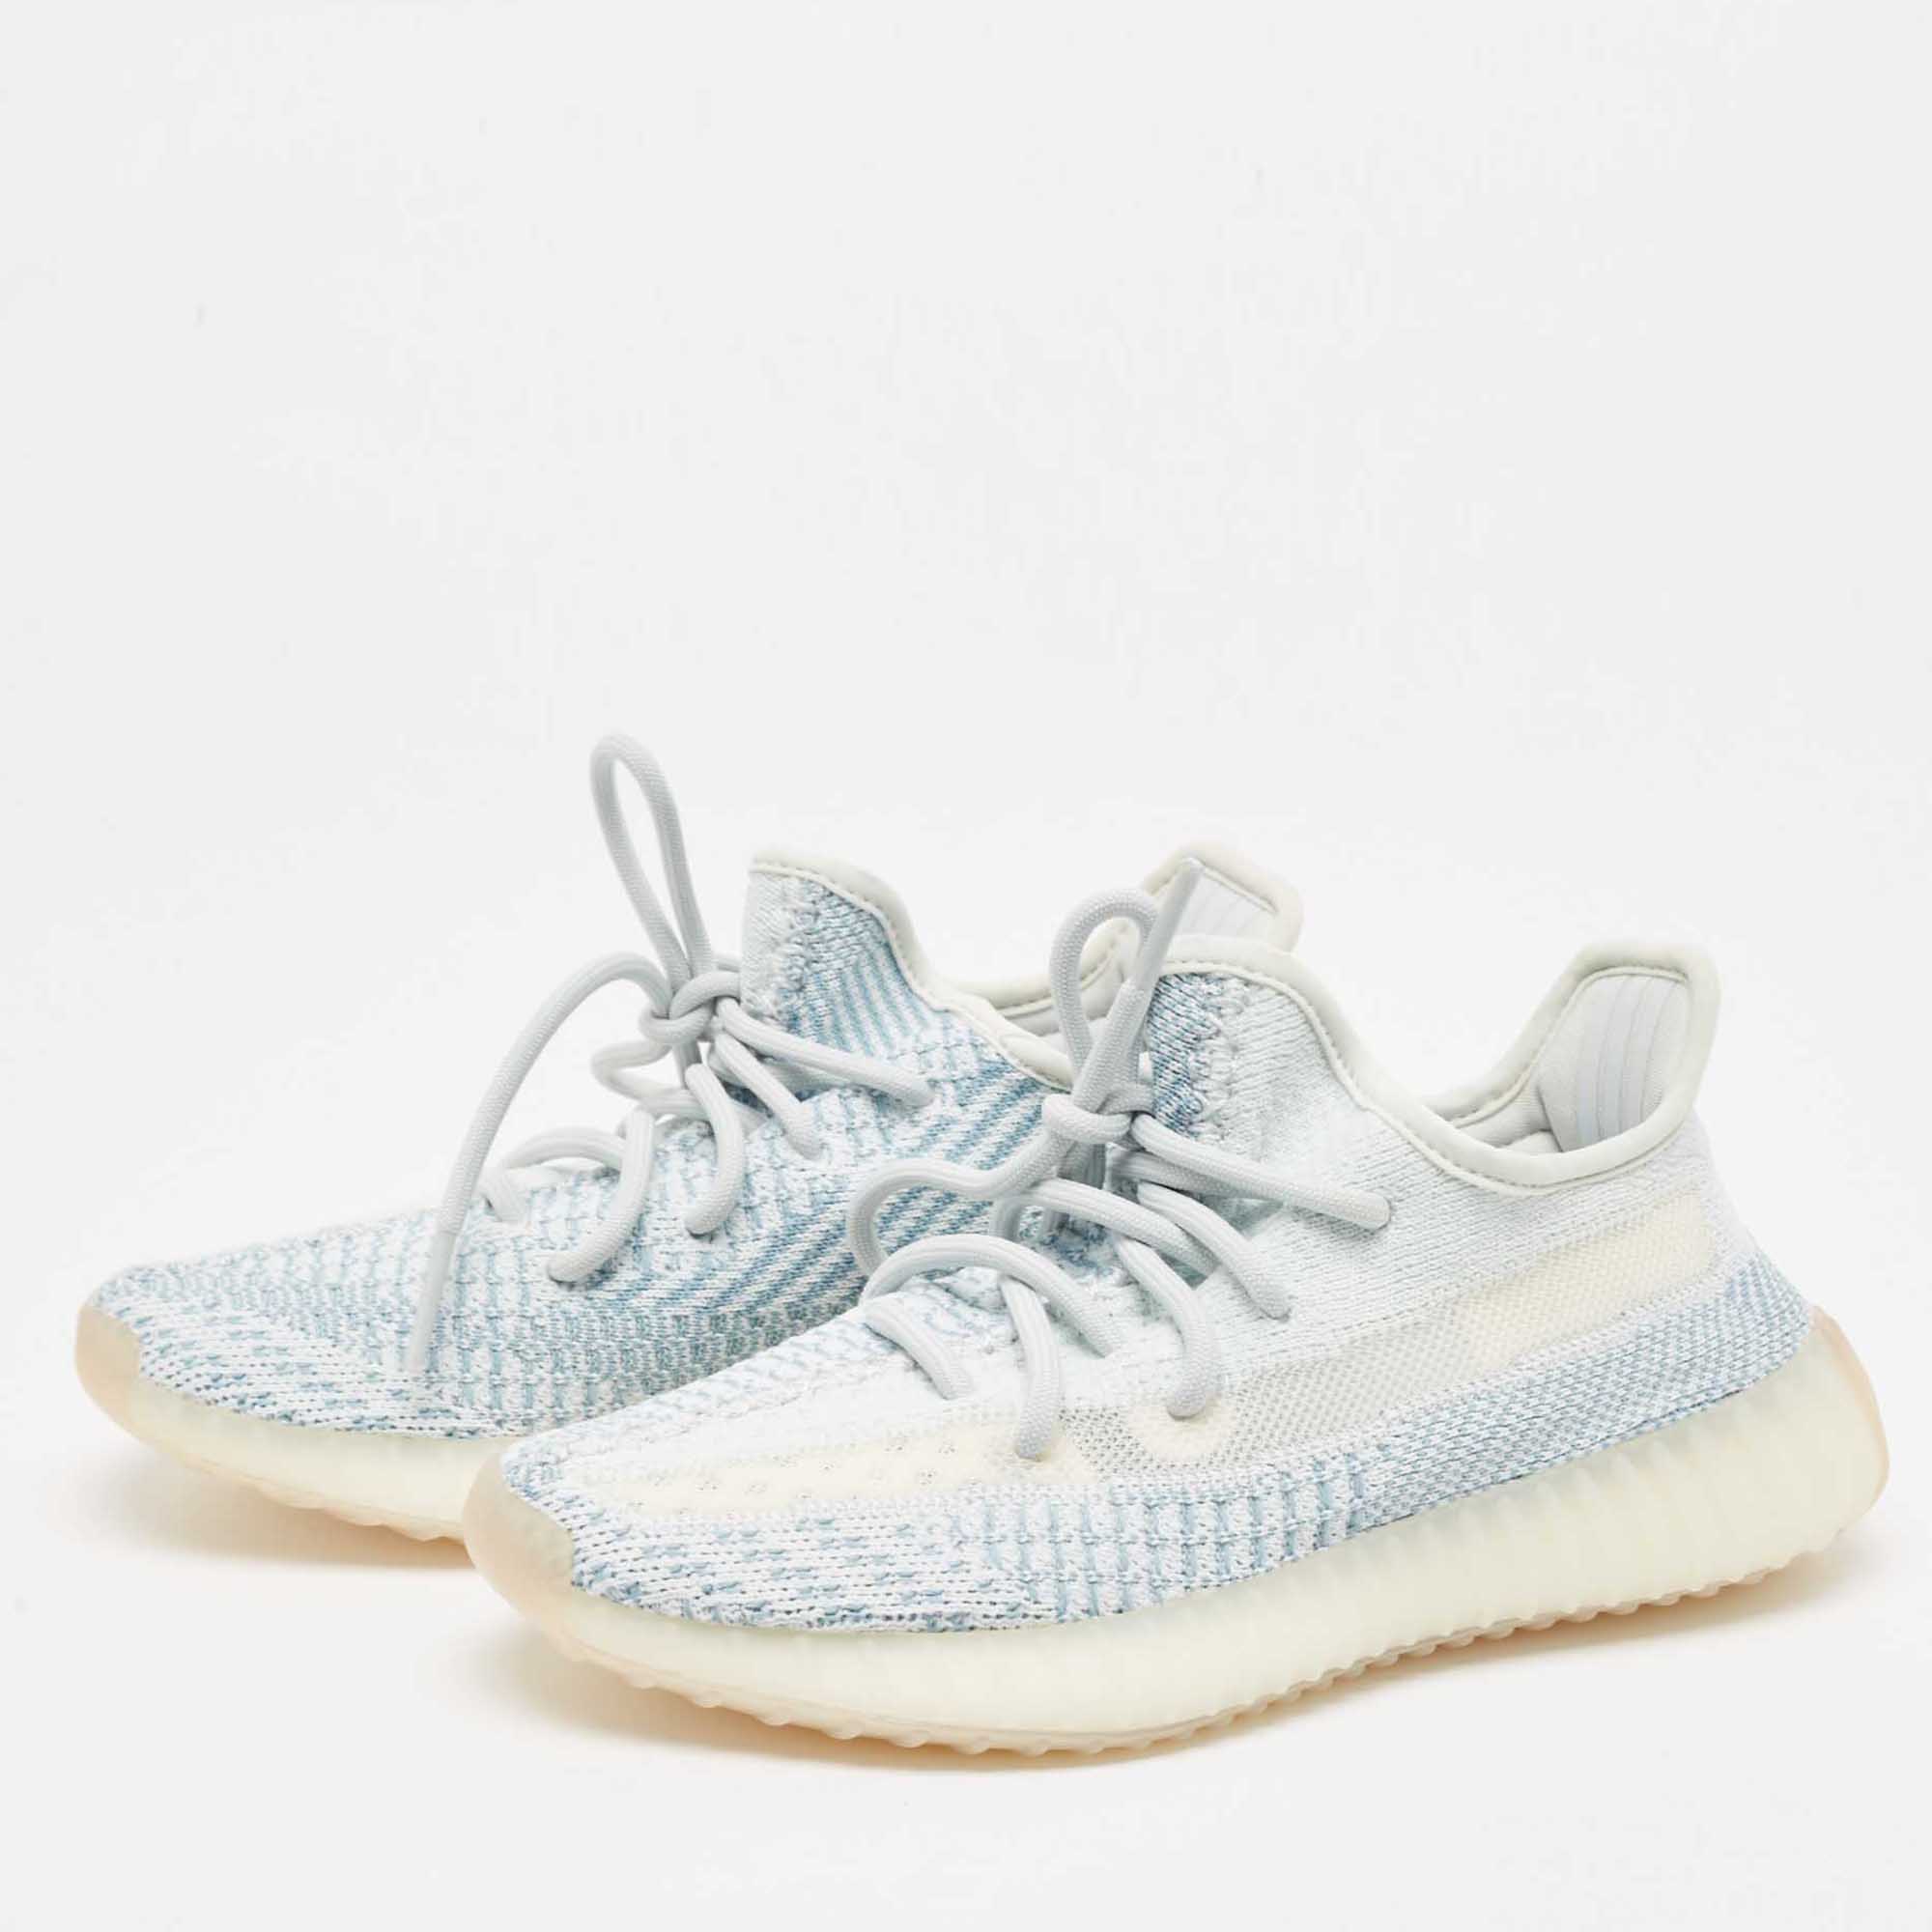 

Yeezy x Adidas Whiite/Blue Knit Fabric Boost 350 V2 Cloud White Non Reflective Sneakers Size 36 2/3